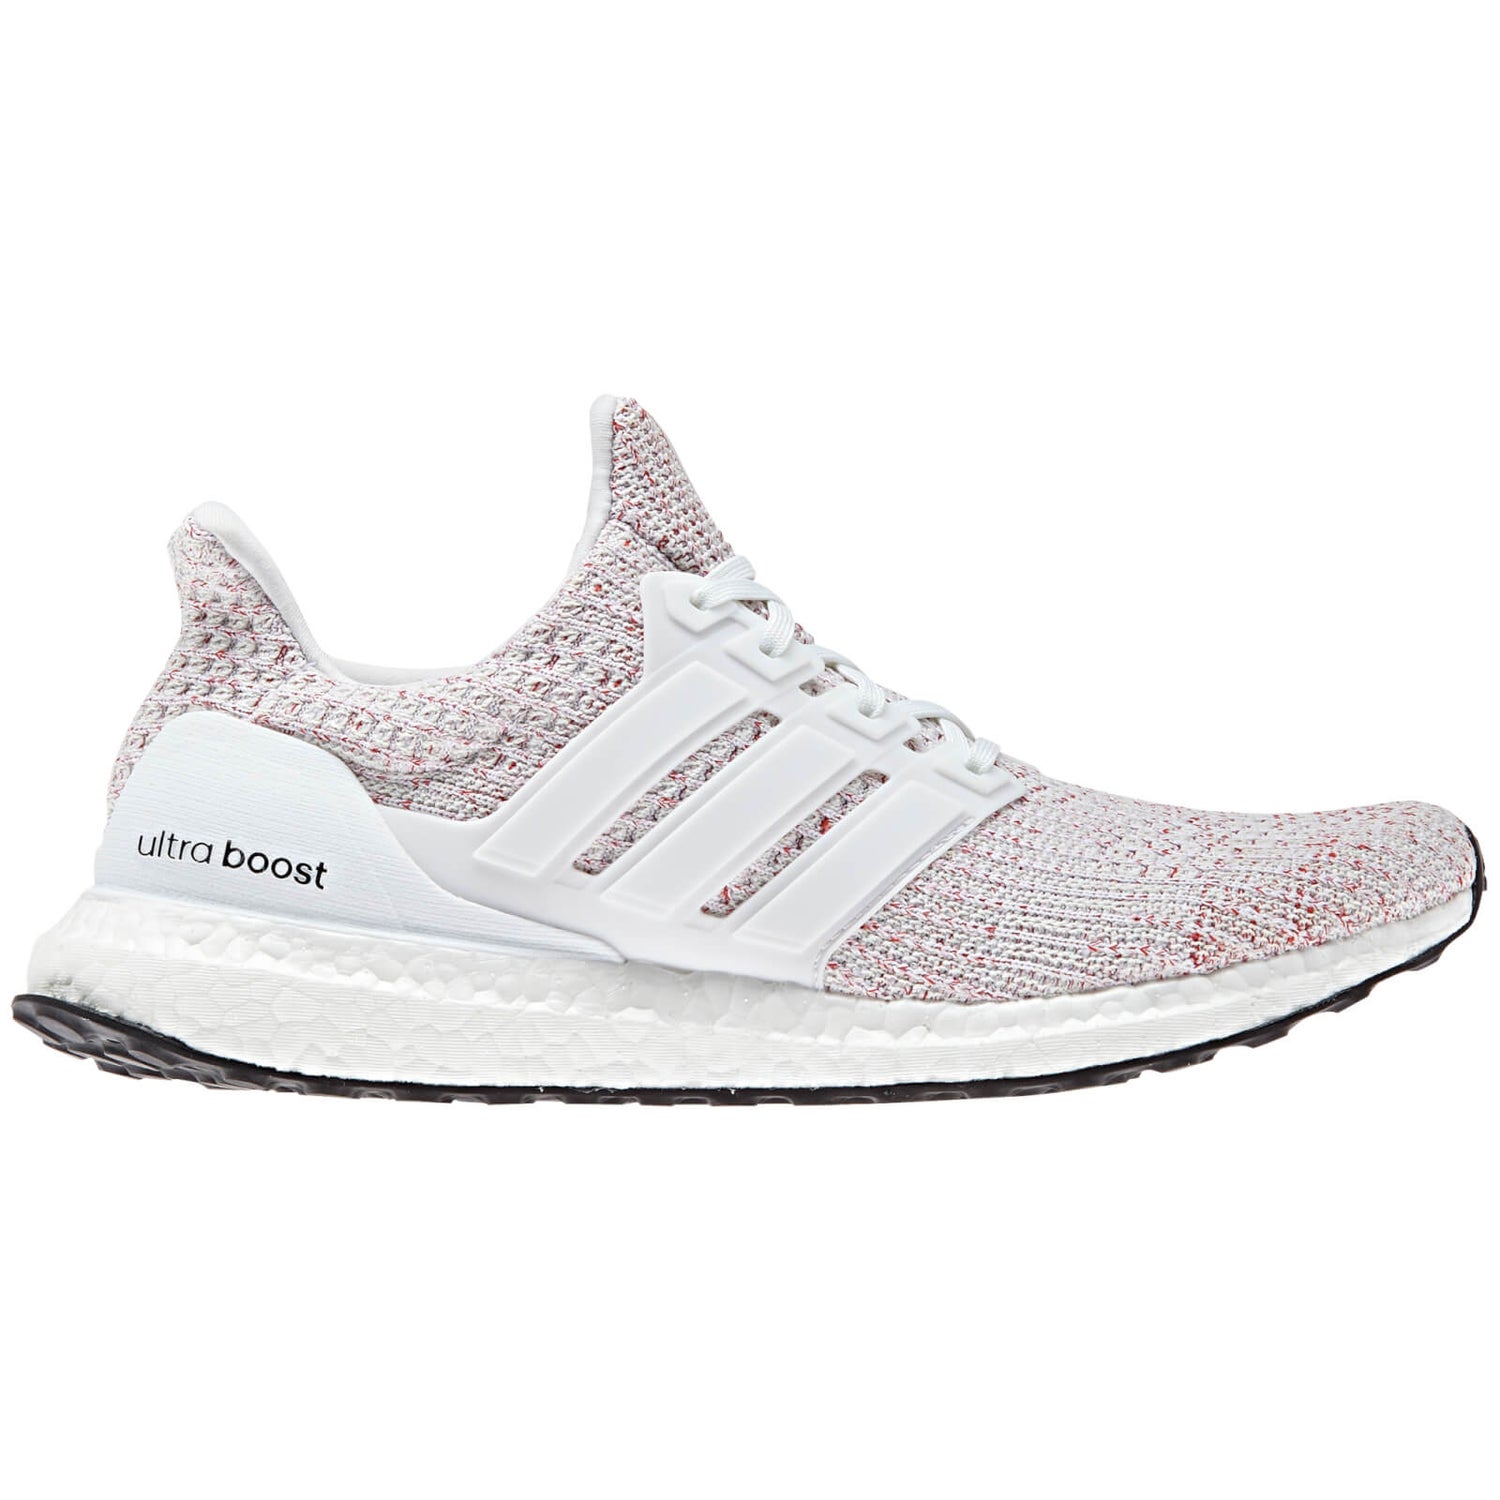 adidas Ultraboost Running Shoes - White/Red | ProBikeKit.com